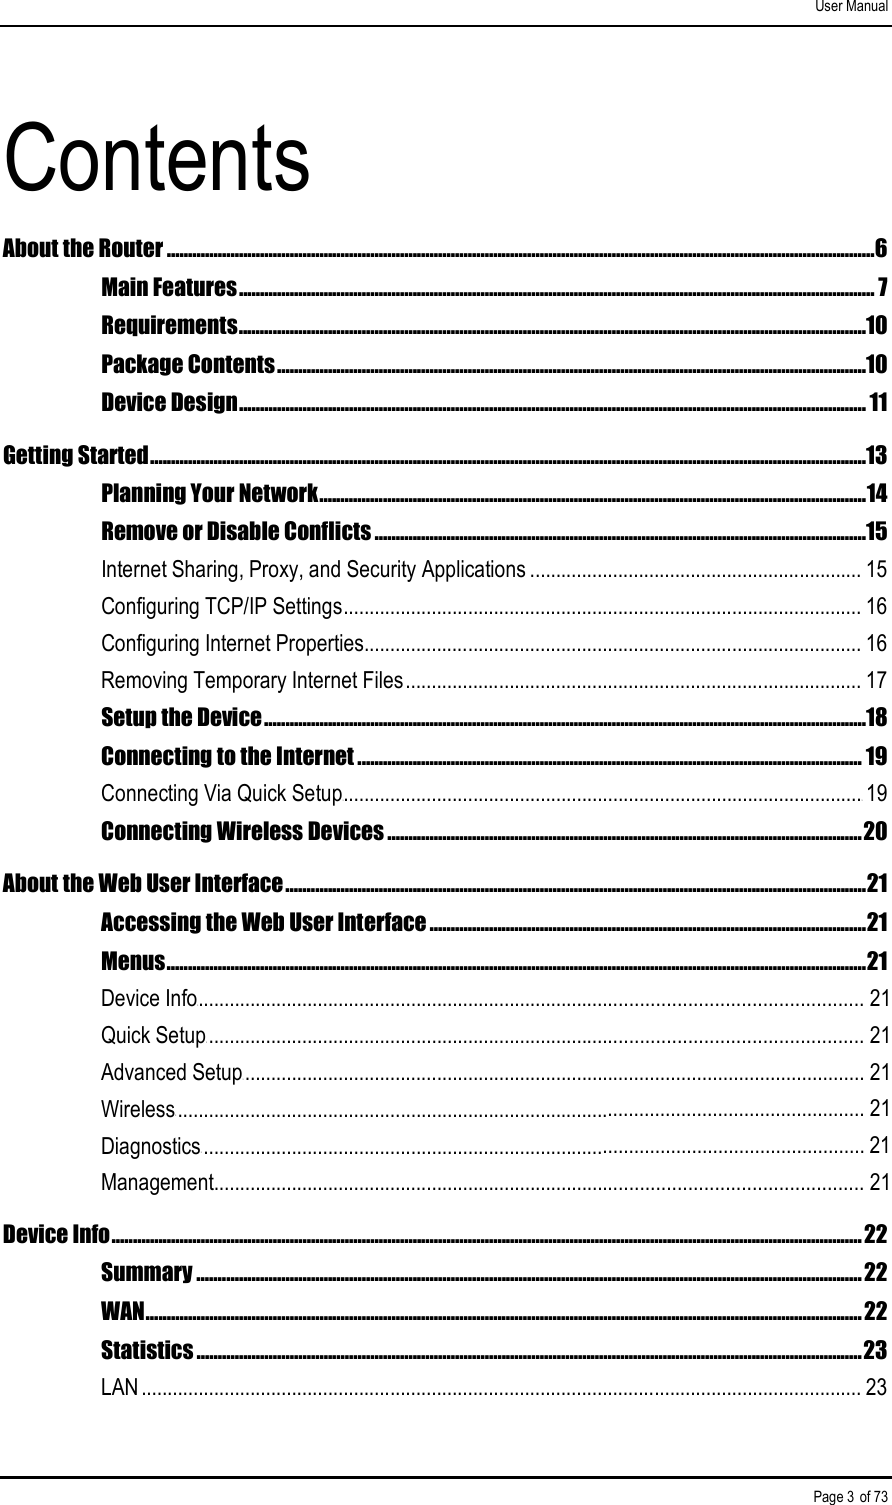 User Manual Page 3 of 73 Contents About the Router .......................................................................................................................................................................6 Main Features...................................................................................................................................................... 7 Requirements....................................................................................................................................................10 Package Contents...........................................................................................................................................10 Device Design.................................................................................................................................................... 11 Getting Started.........................................................................................................................................................................13 Planning Your Network.................................................................................................................................14 Remove or Disable Conflicts ....................................................................................................................15 Internet Sharing, Proxy, and Security Applications ................................................................ 15 Configuring TCP/IP Settings.................................................................................................... 16 Configuring Internet Properties................................................................................................ 16 Removing Temporary Internet Files........................................................................................ 17 Setup the Device..............................................................................................................................................18 Connecting to the Internet ....................................................................................................................... 19 Connecting Via Quick Setup3....................................................................................................319 Connecting Wireless Devices ................................................................................................................20 About the Web User Interface.........................................................................................................................................21 Accessing the Web User Interface .......................................................................................................21 Menus.....................................................................................................................................................................21 Device Info3............................................................................................................................... 21Quick Setup3............................................................................................................................. 21Advanced Setup3....................................................................................................................... 21Wireless3.................................................................................................................................... 21Diagnostics3............................................................................................................................... 21Management............................................................................................................................ 21Device Info.................................................................................................................................................................................22 Summary .............................................................................................................................................................22 WAN.........................................................................................................................................................................22 Statistics .............................................................................................................................................................23 LAN ........................................................................................................................................... 23 